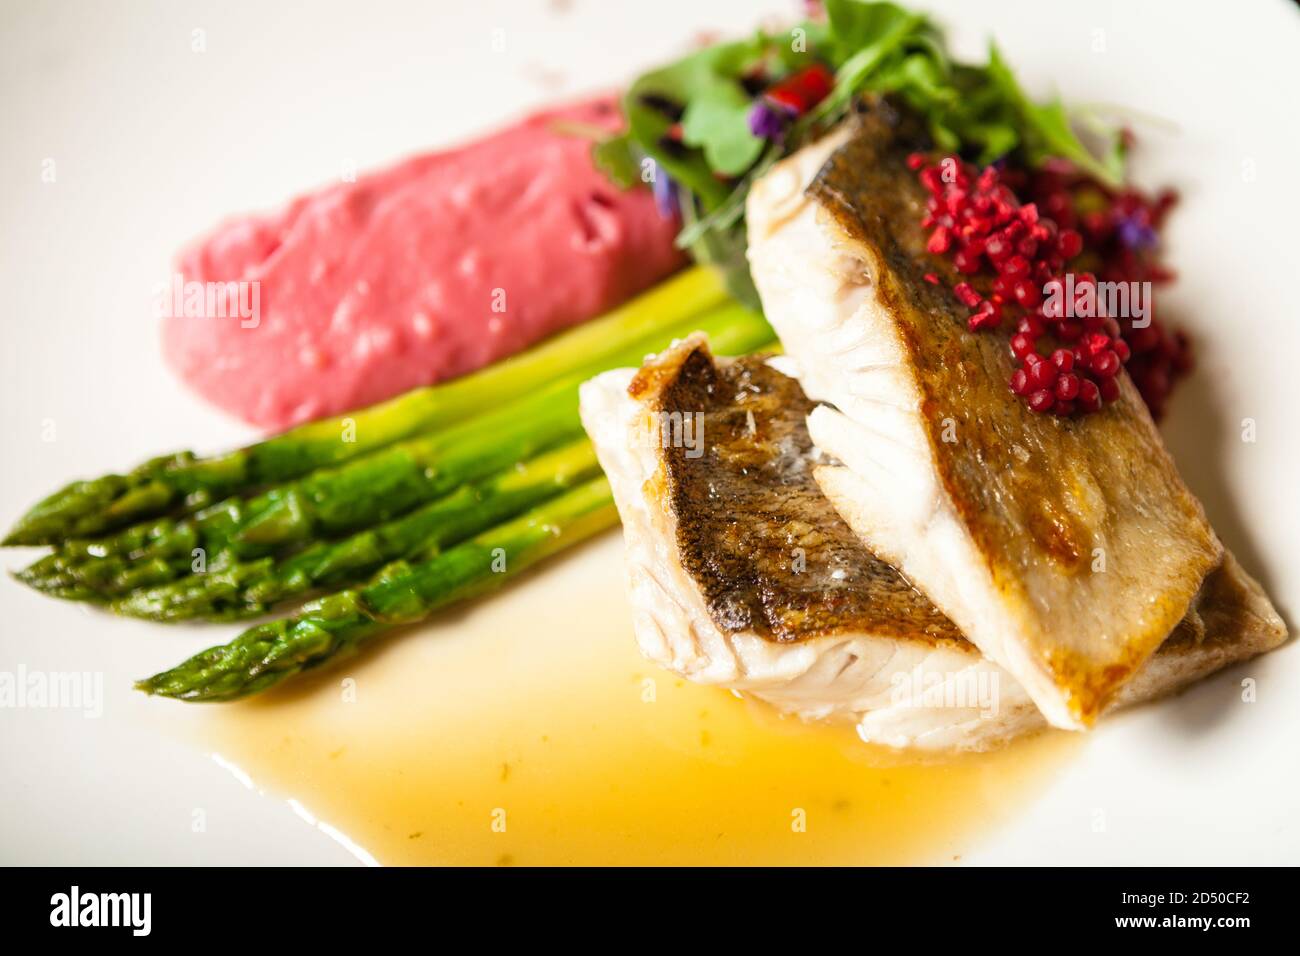 Pike-perch fillet. Asparagus, pearl couscous, white wine sauce, beet-flavored mashed potatoes. Delicious seafood fish closeup served on a table for Stock Photo